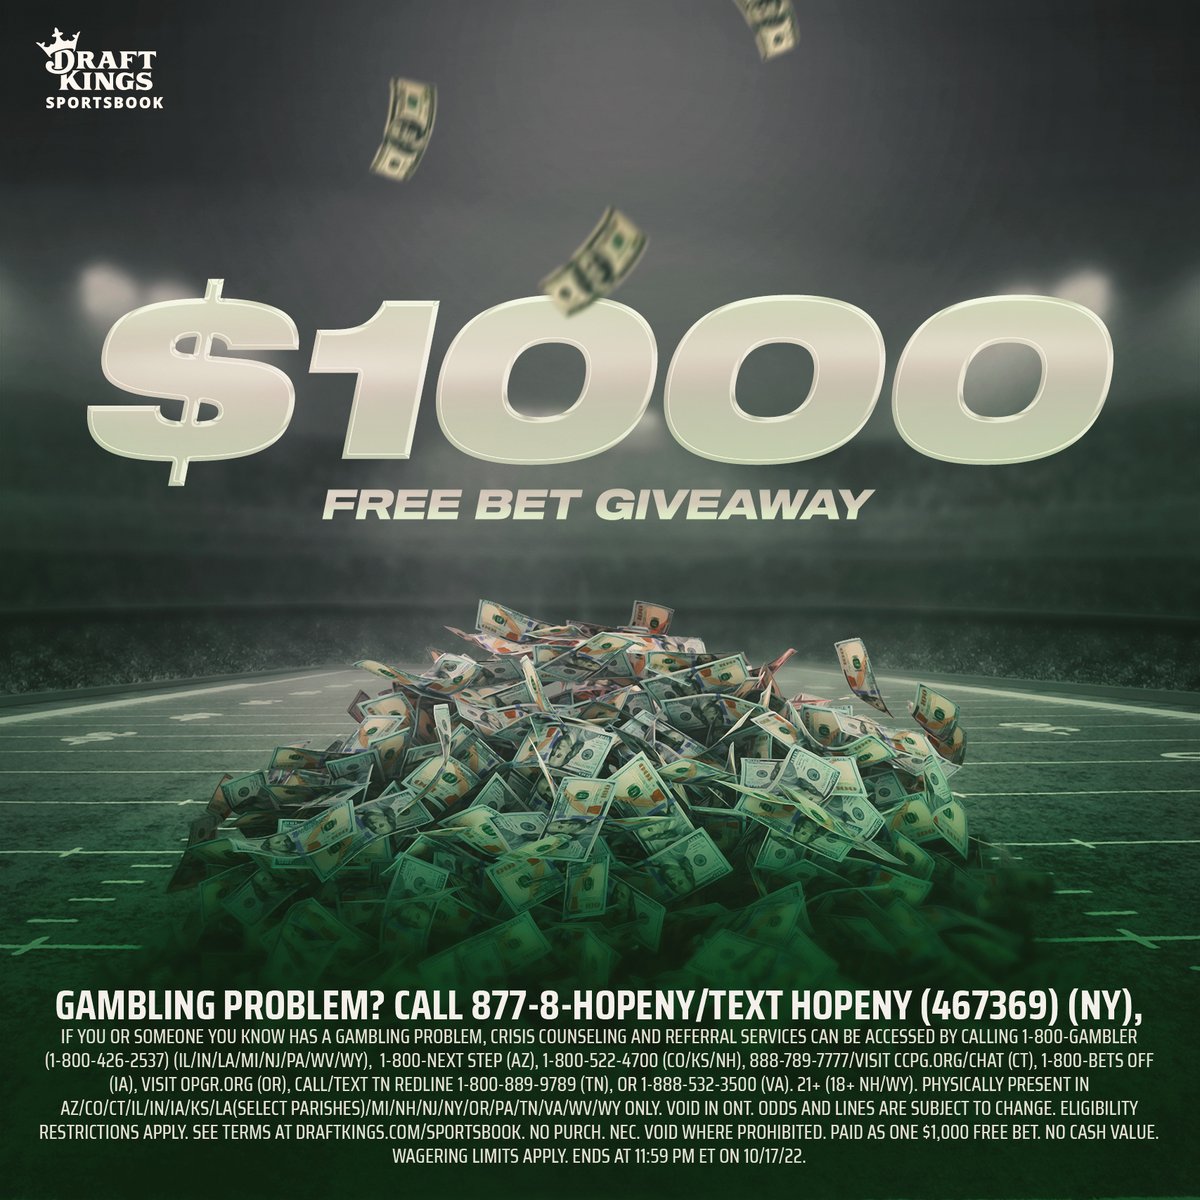 🤑 $1000 FREE BET ALERT 🤑 Follow these steps to enter for a chance to win. 1⃣ Follow us 2⃣ Retweet this post 3⃣ Reply using #DraftKingsMNF and your pick to win tonight's #MNF game. Rules: bit.ly/3T9yjUZ